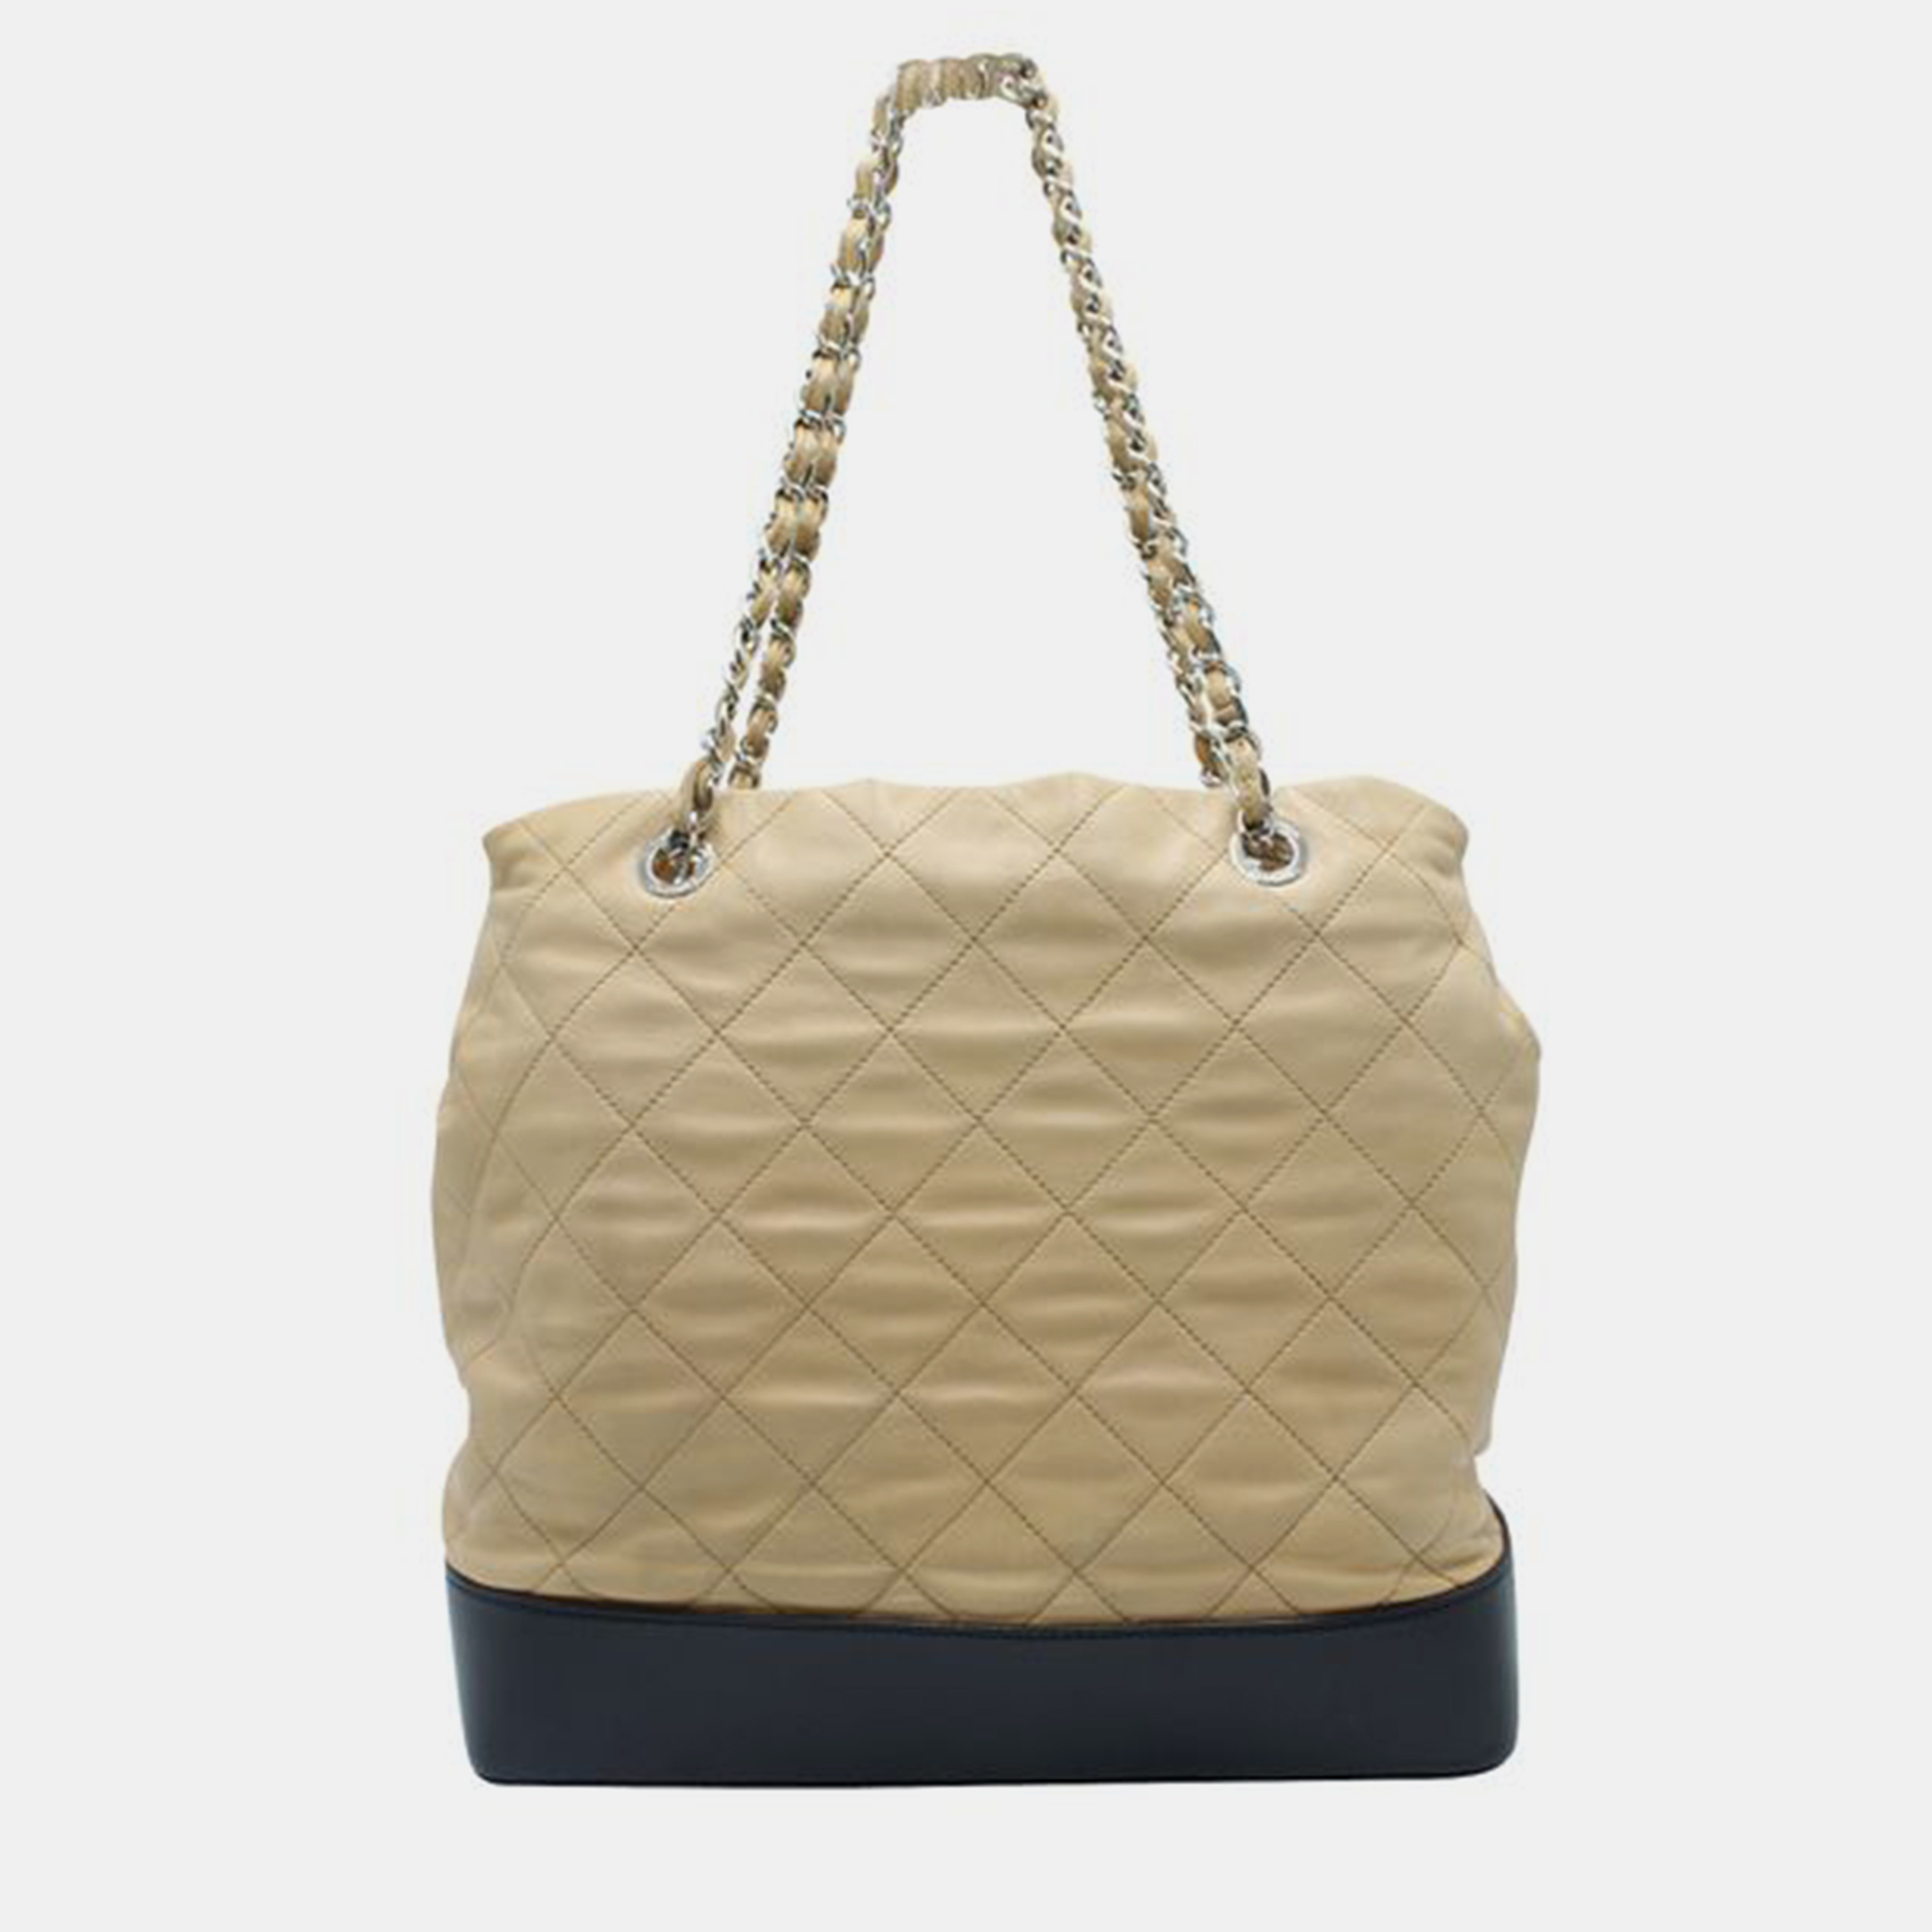 CHANEL Light Brown And Black Quilted Tote Bag In Silver Hardware TOTE BAGS